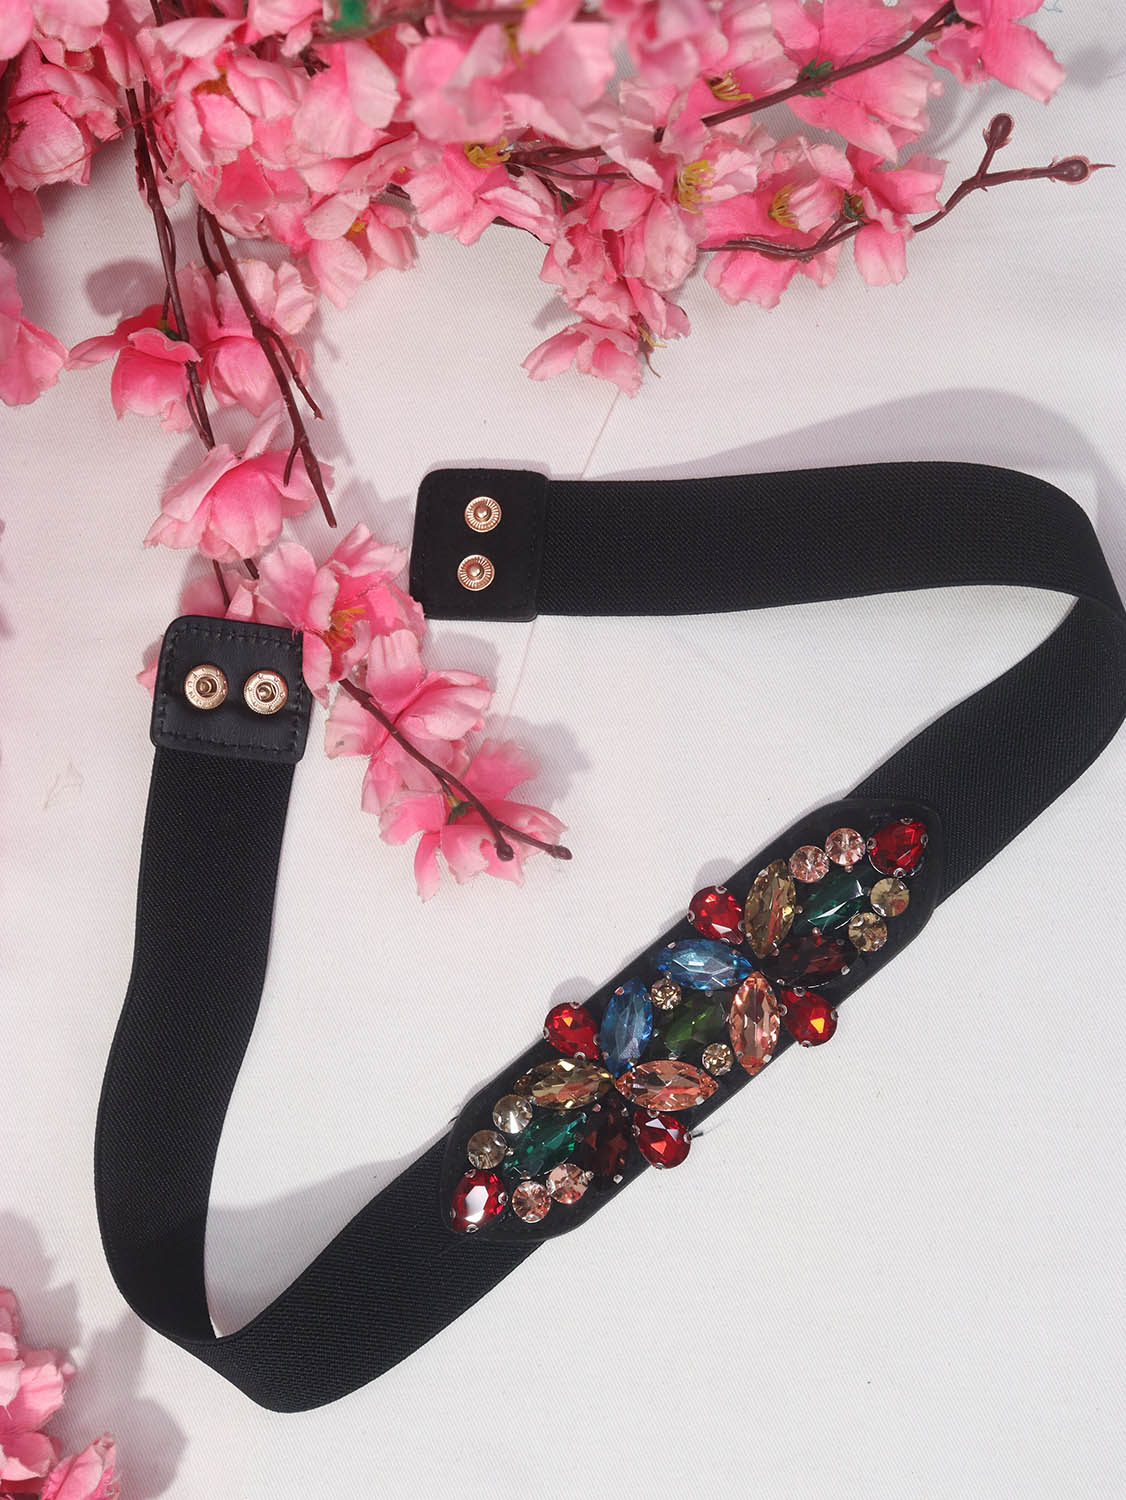 Upgrade Your Style with Blackout Buckle-Up Belts - Shop Now! - Luxurion World